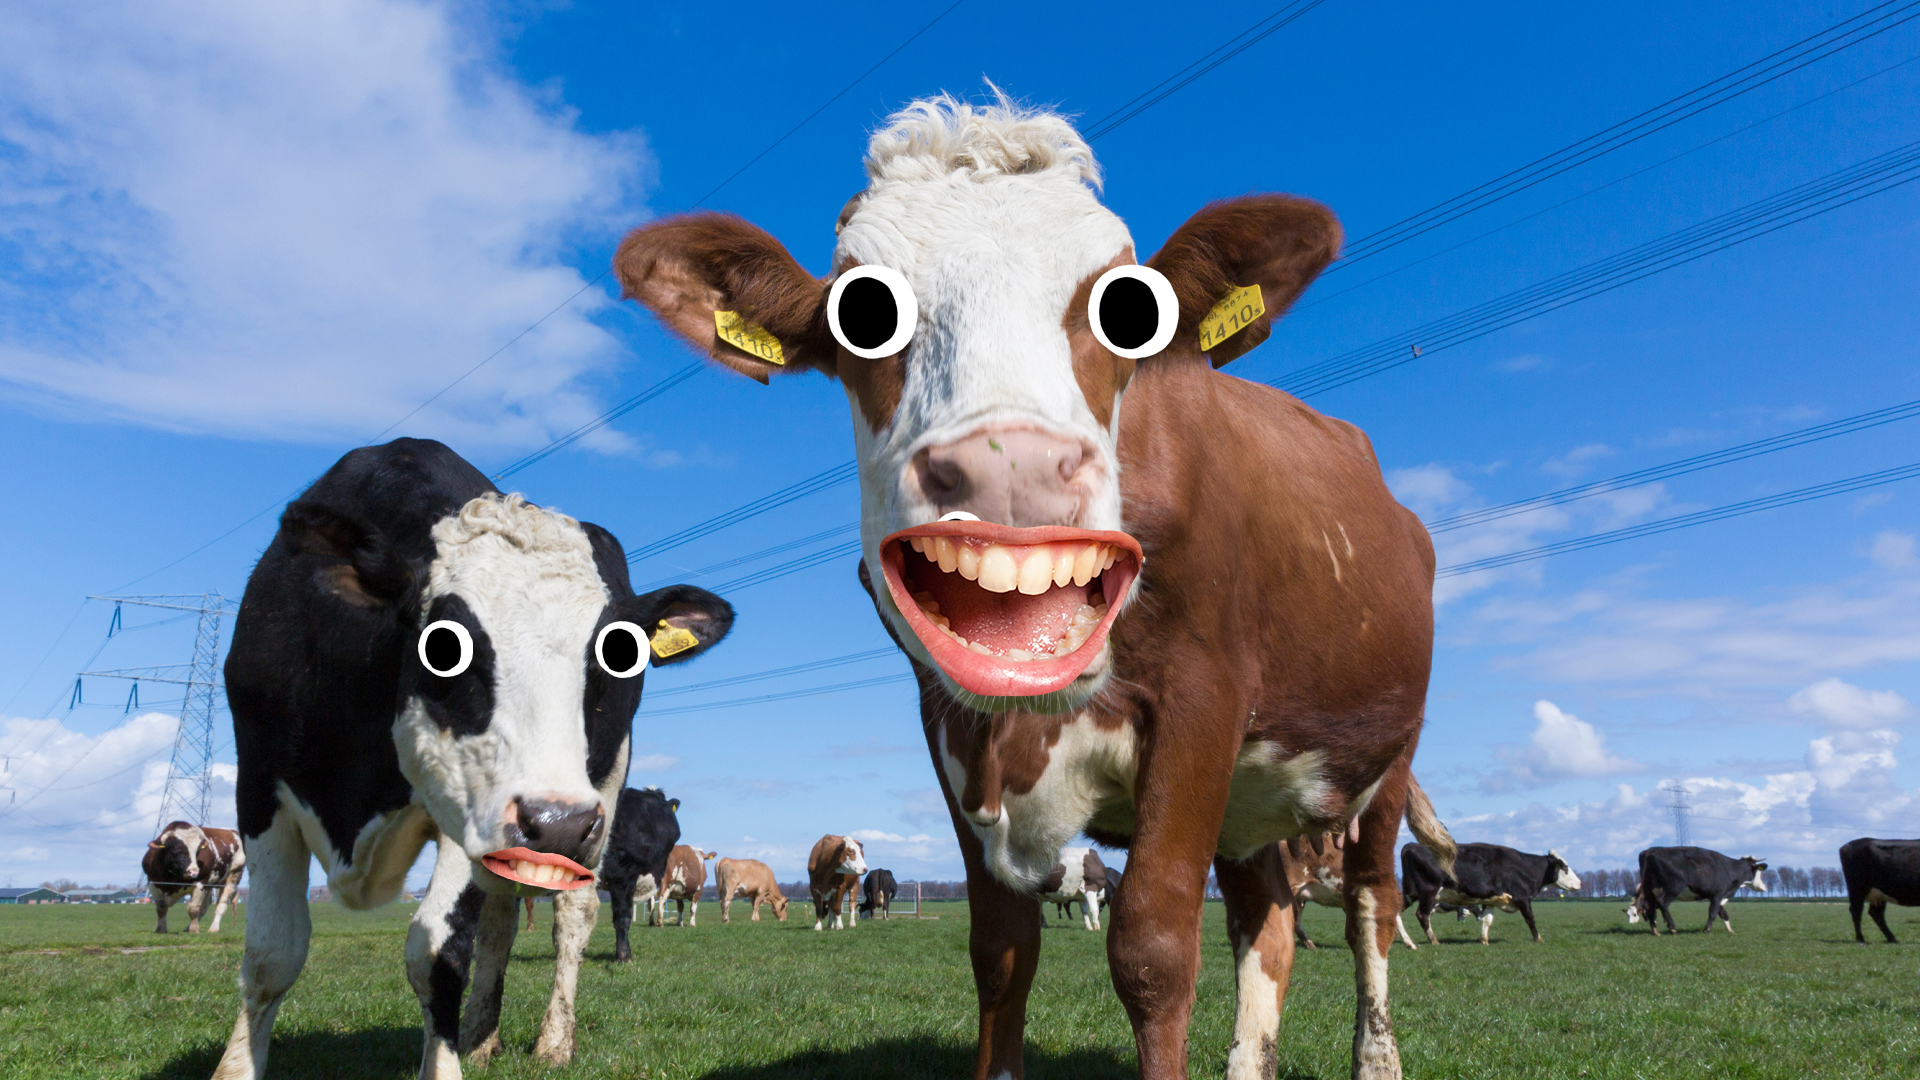 Cow laughing